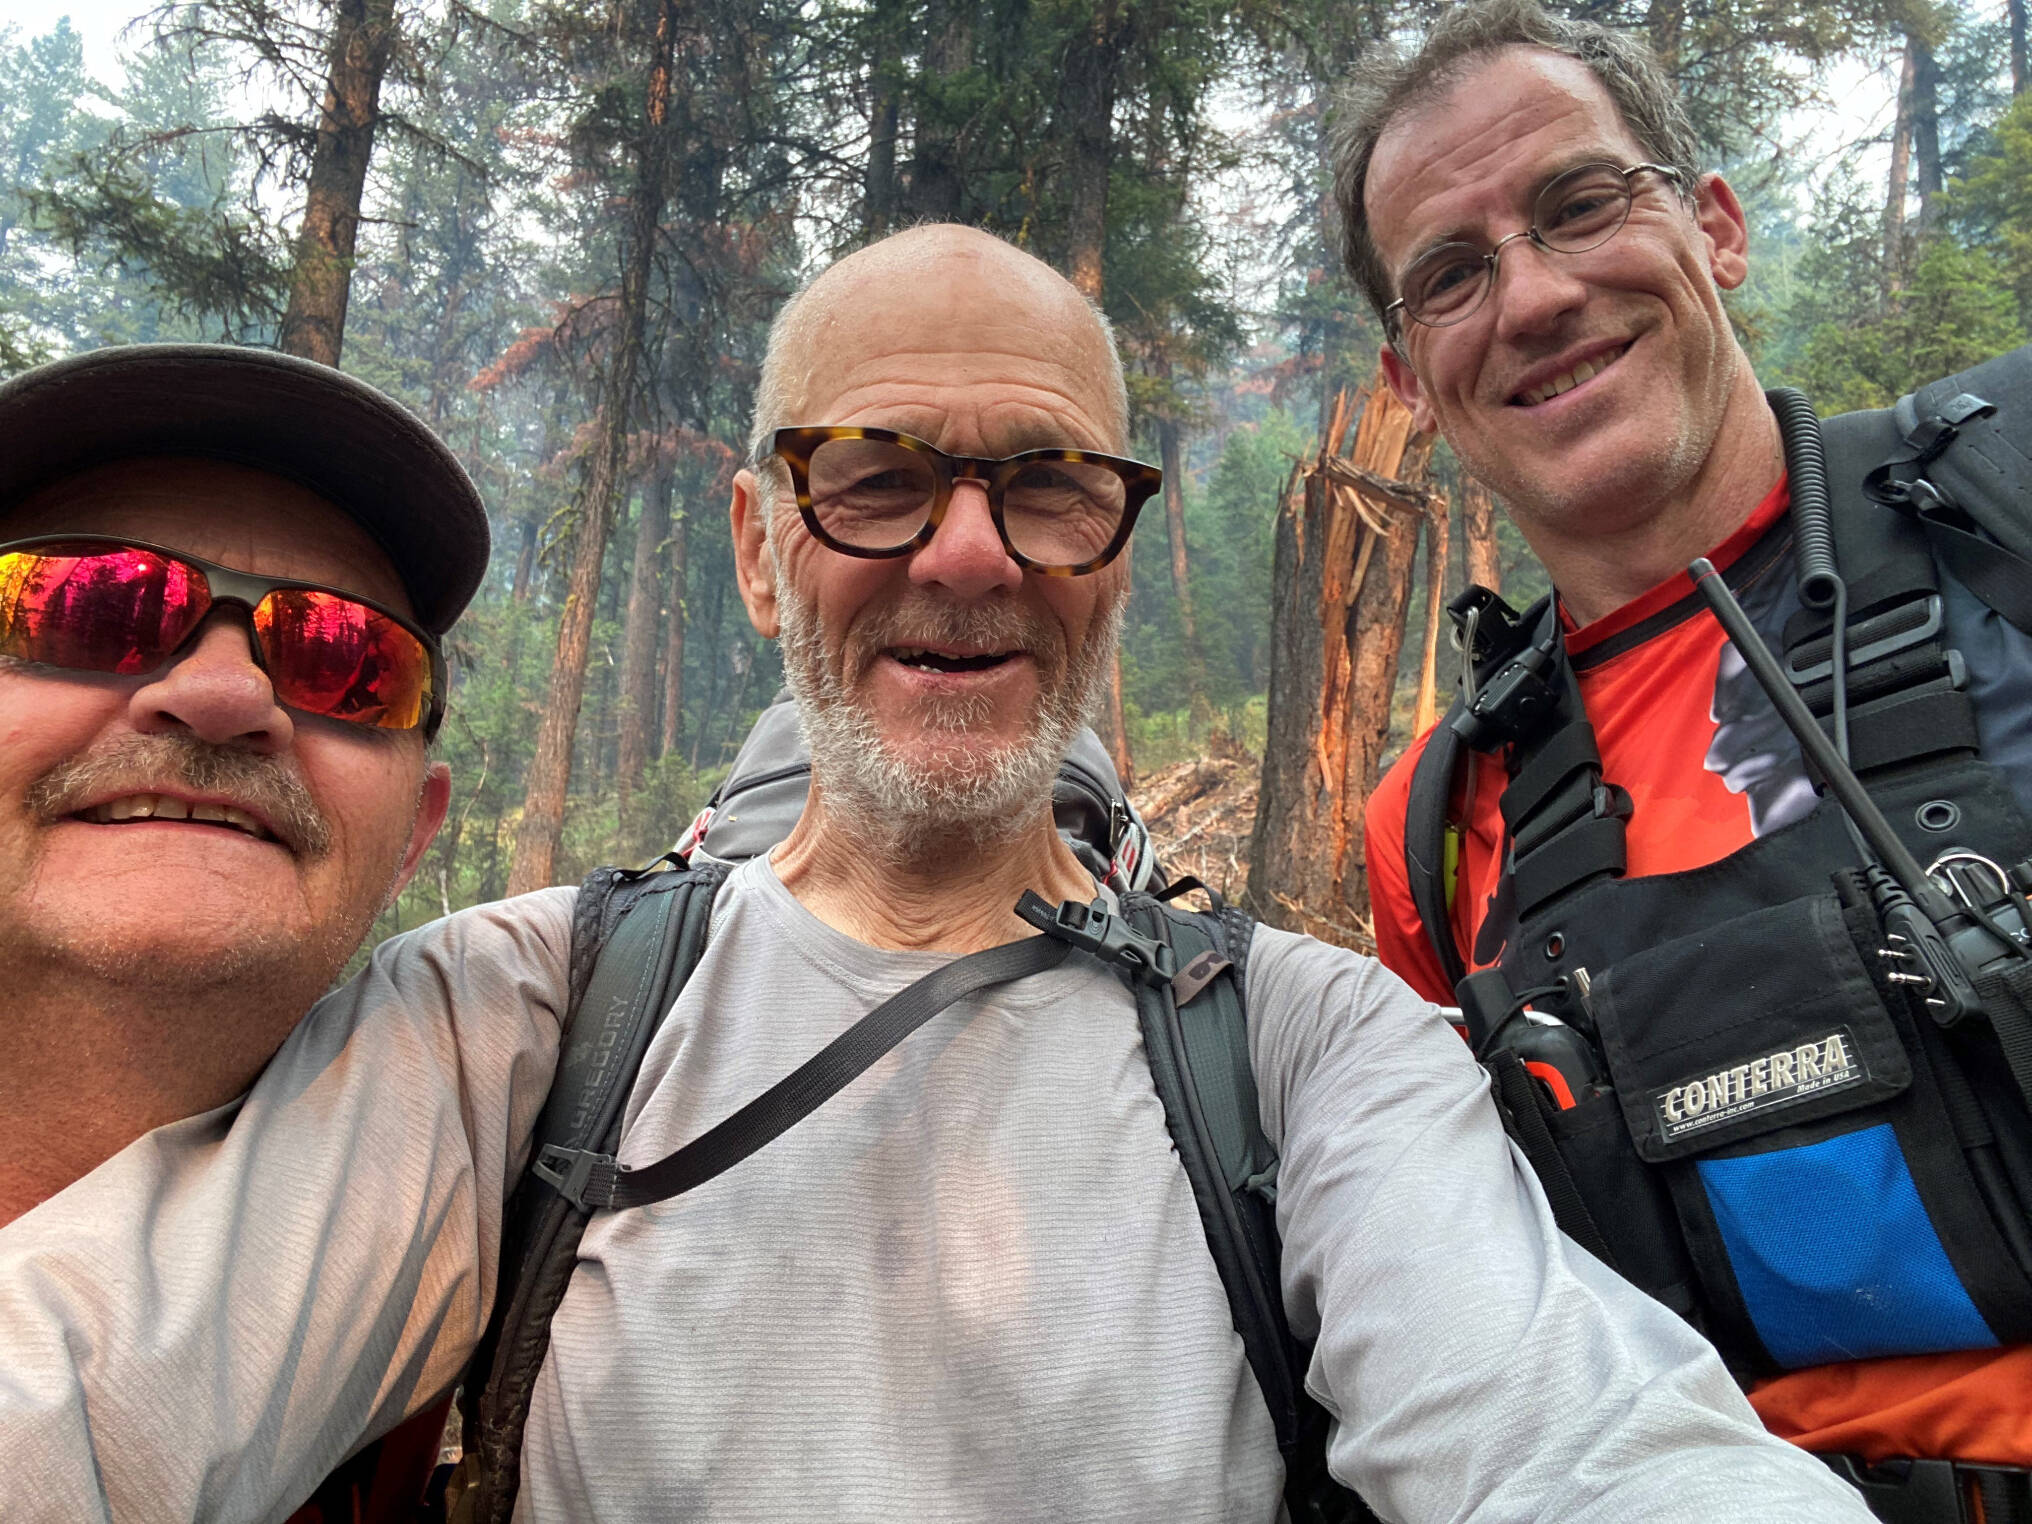 Bernard Cloutier with some of his rescuers from Penticton Search and Rescue who saved the hiker from the Cathedral Lakes Park fire. (Submitted)